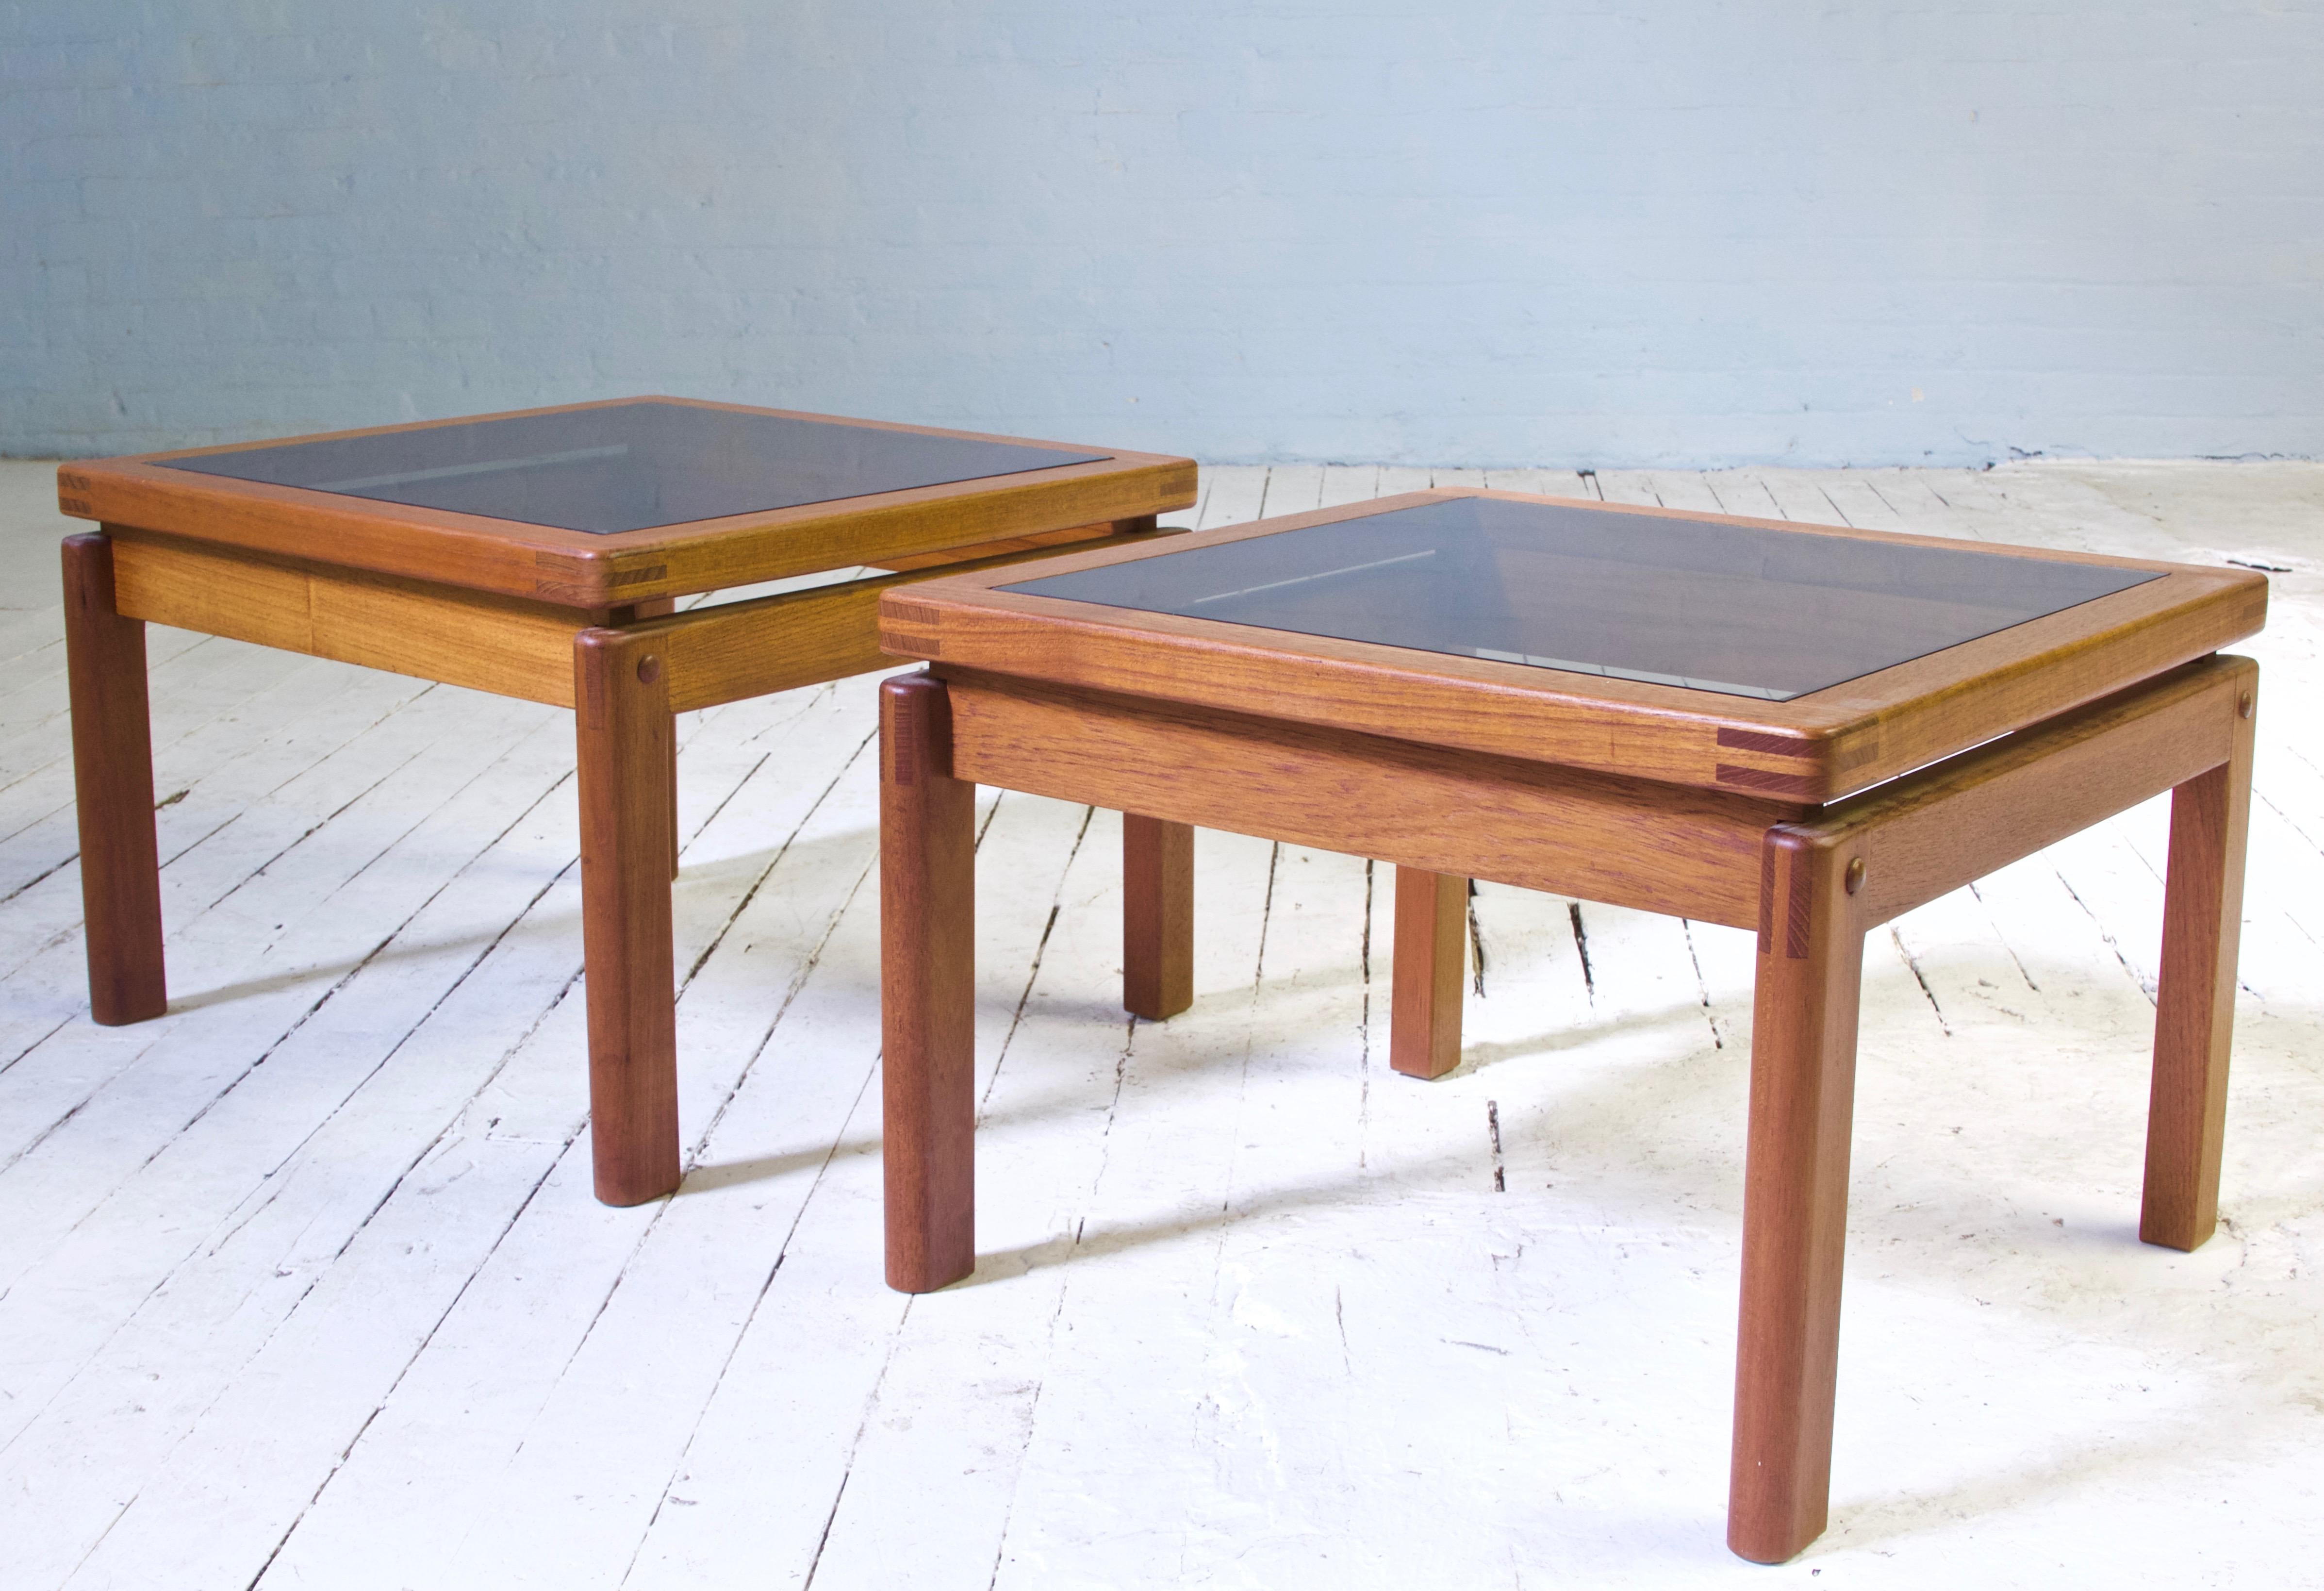 Smoked Glass Vintage Pair of Signed Danish Side Tables with Exposed Joinery in Teak, 1960s For Sale